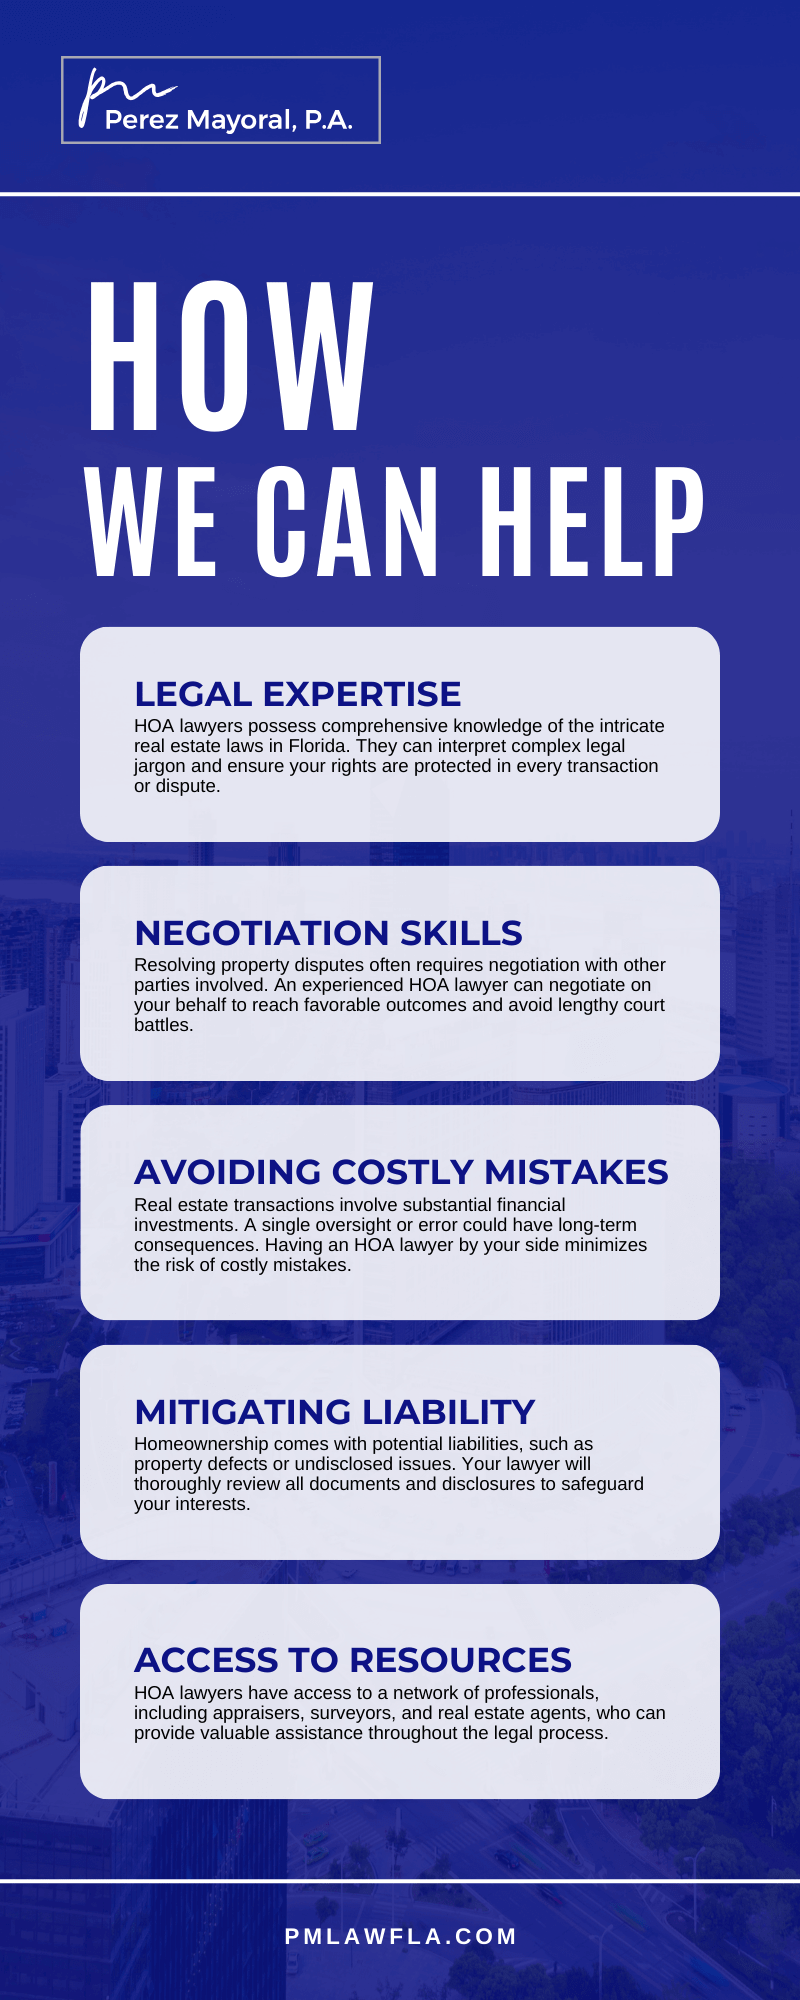 How We Can Help Infographic